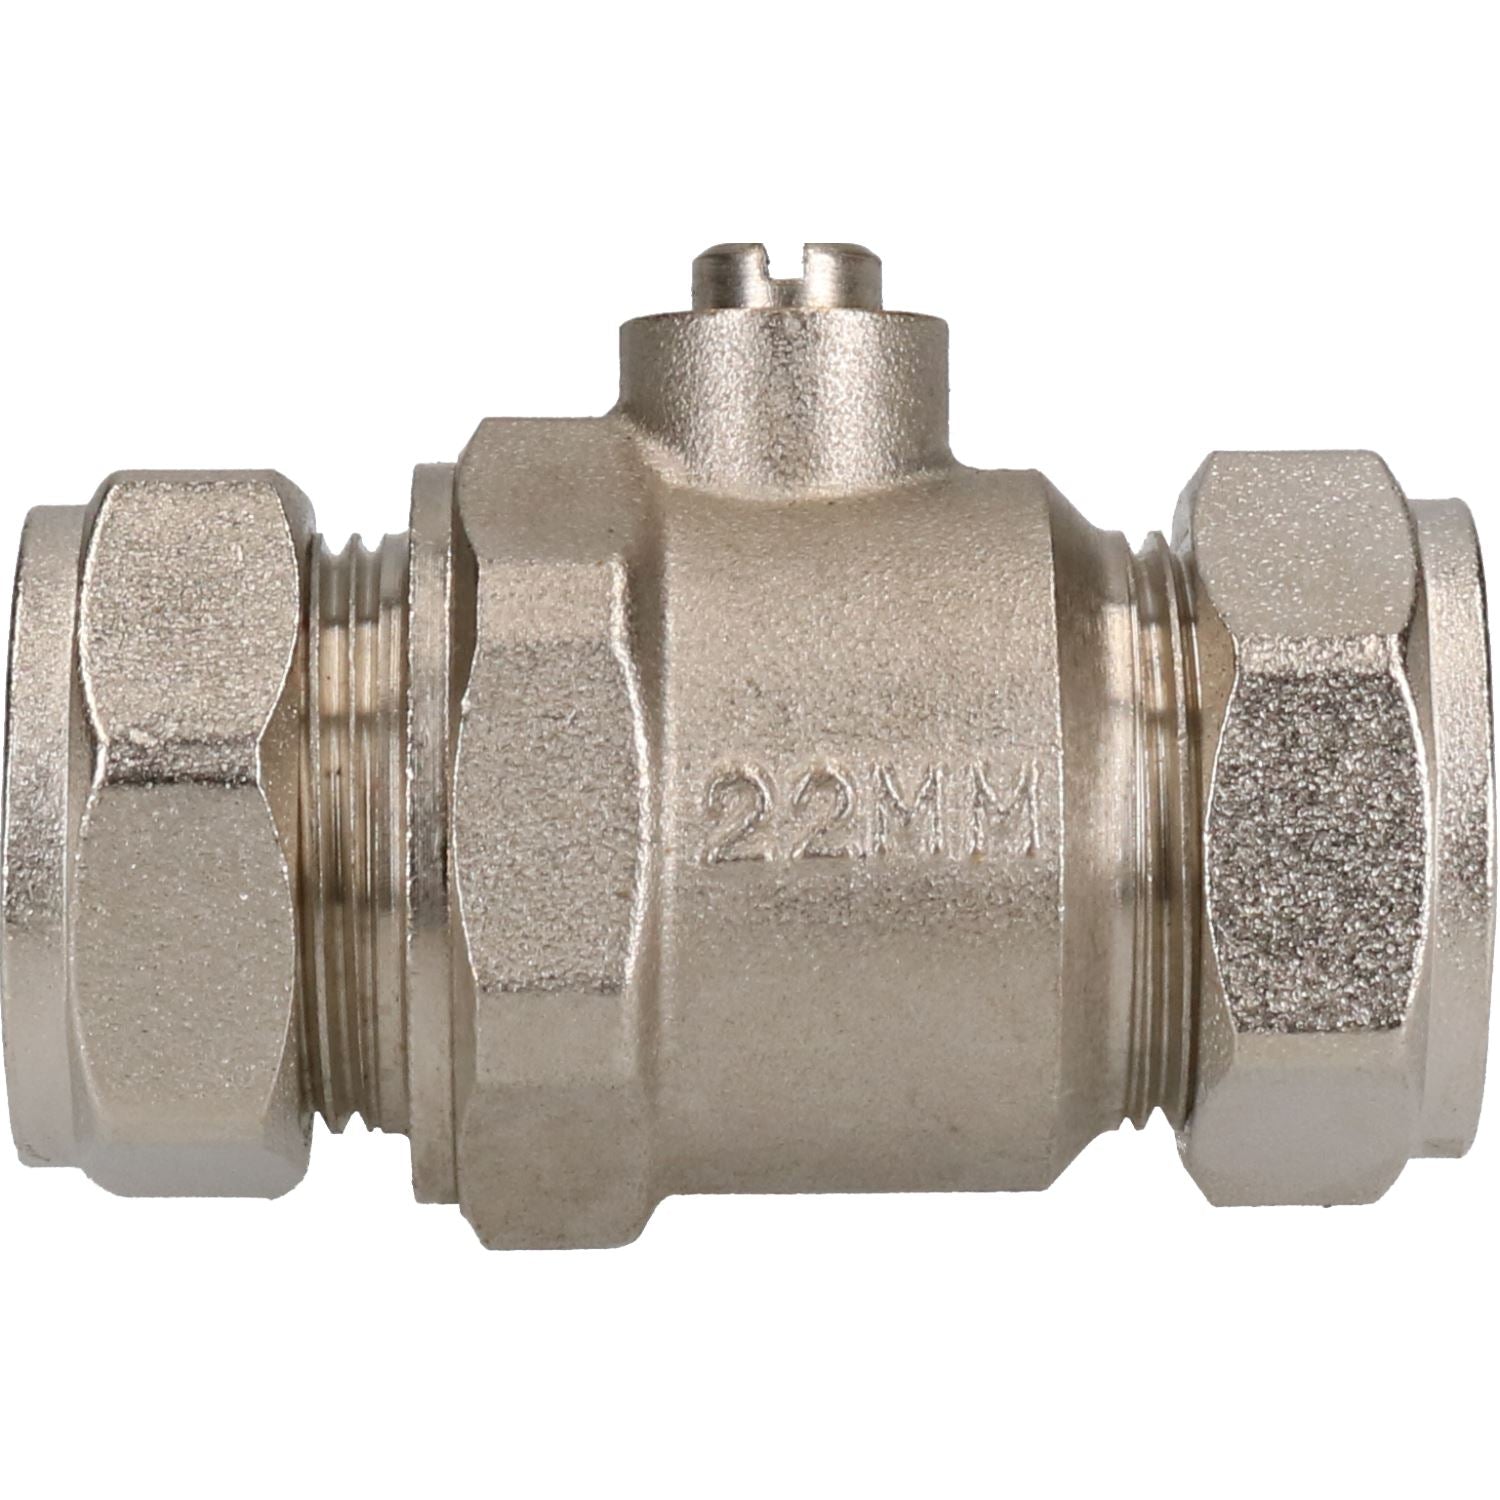 22mm Full Bore Chrome-plated Isolating Valve Hot or Cold Systems for Copper Pipe